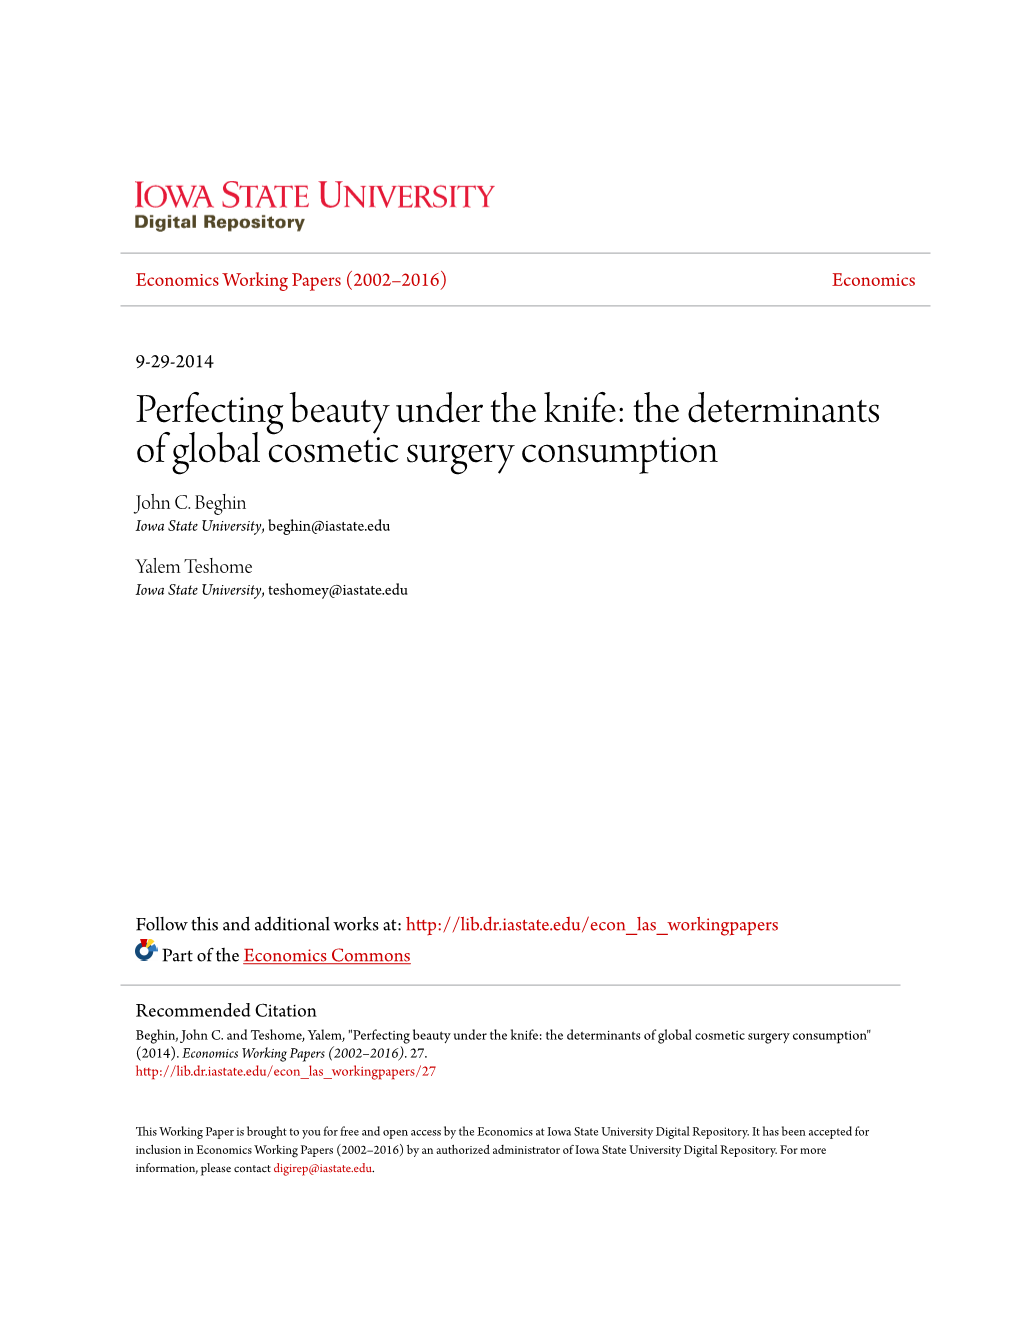 The Determinants of Global Cosmetic Surgery Consumption John C